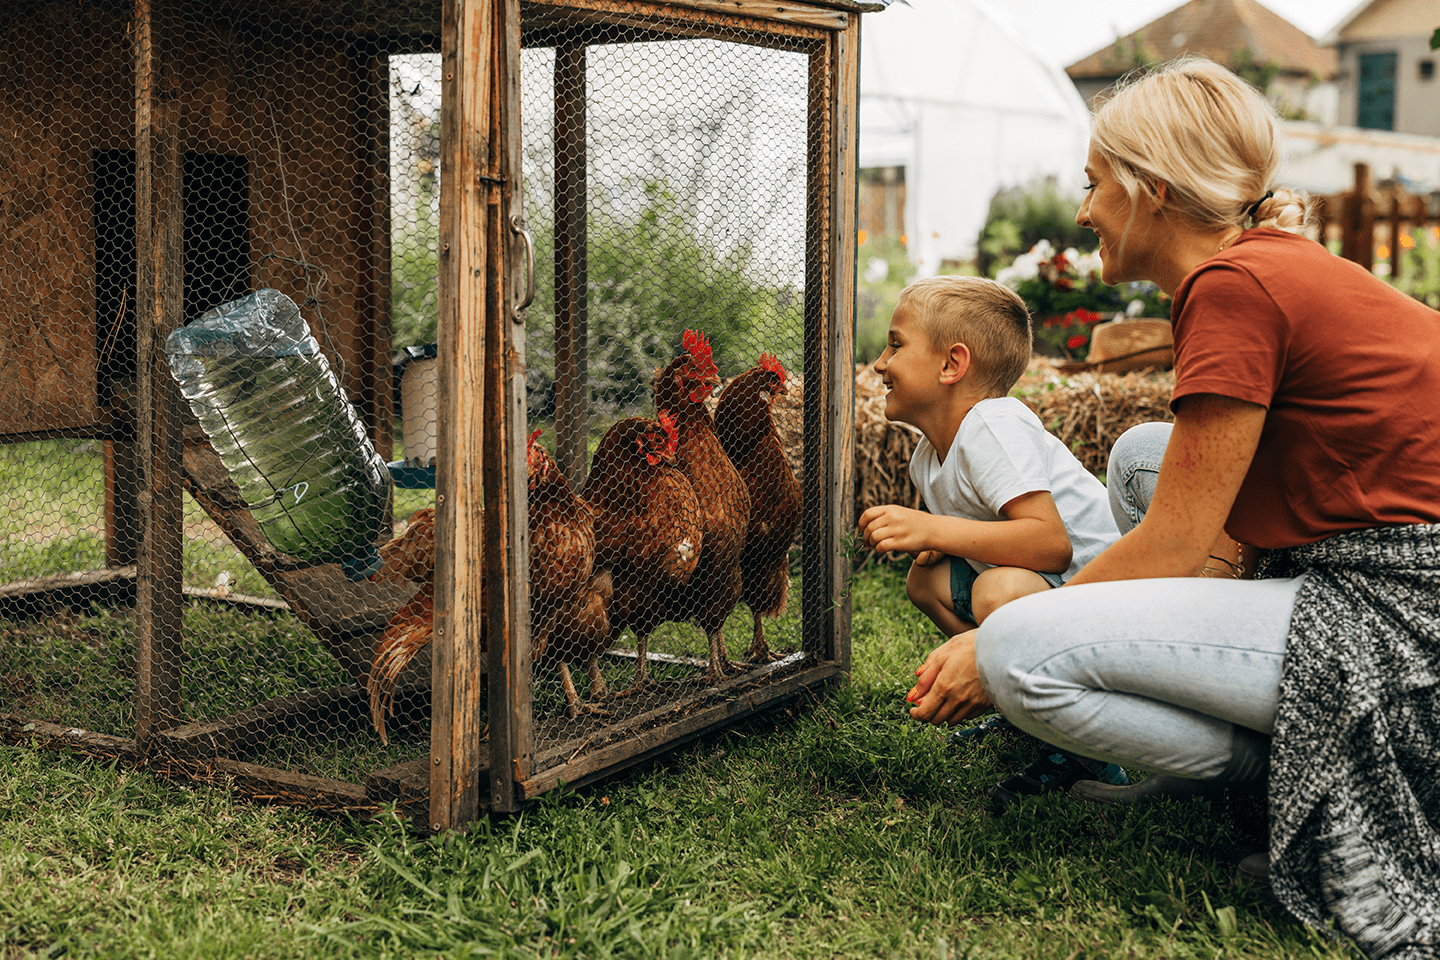 Mother and child looking at chickens in a coop